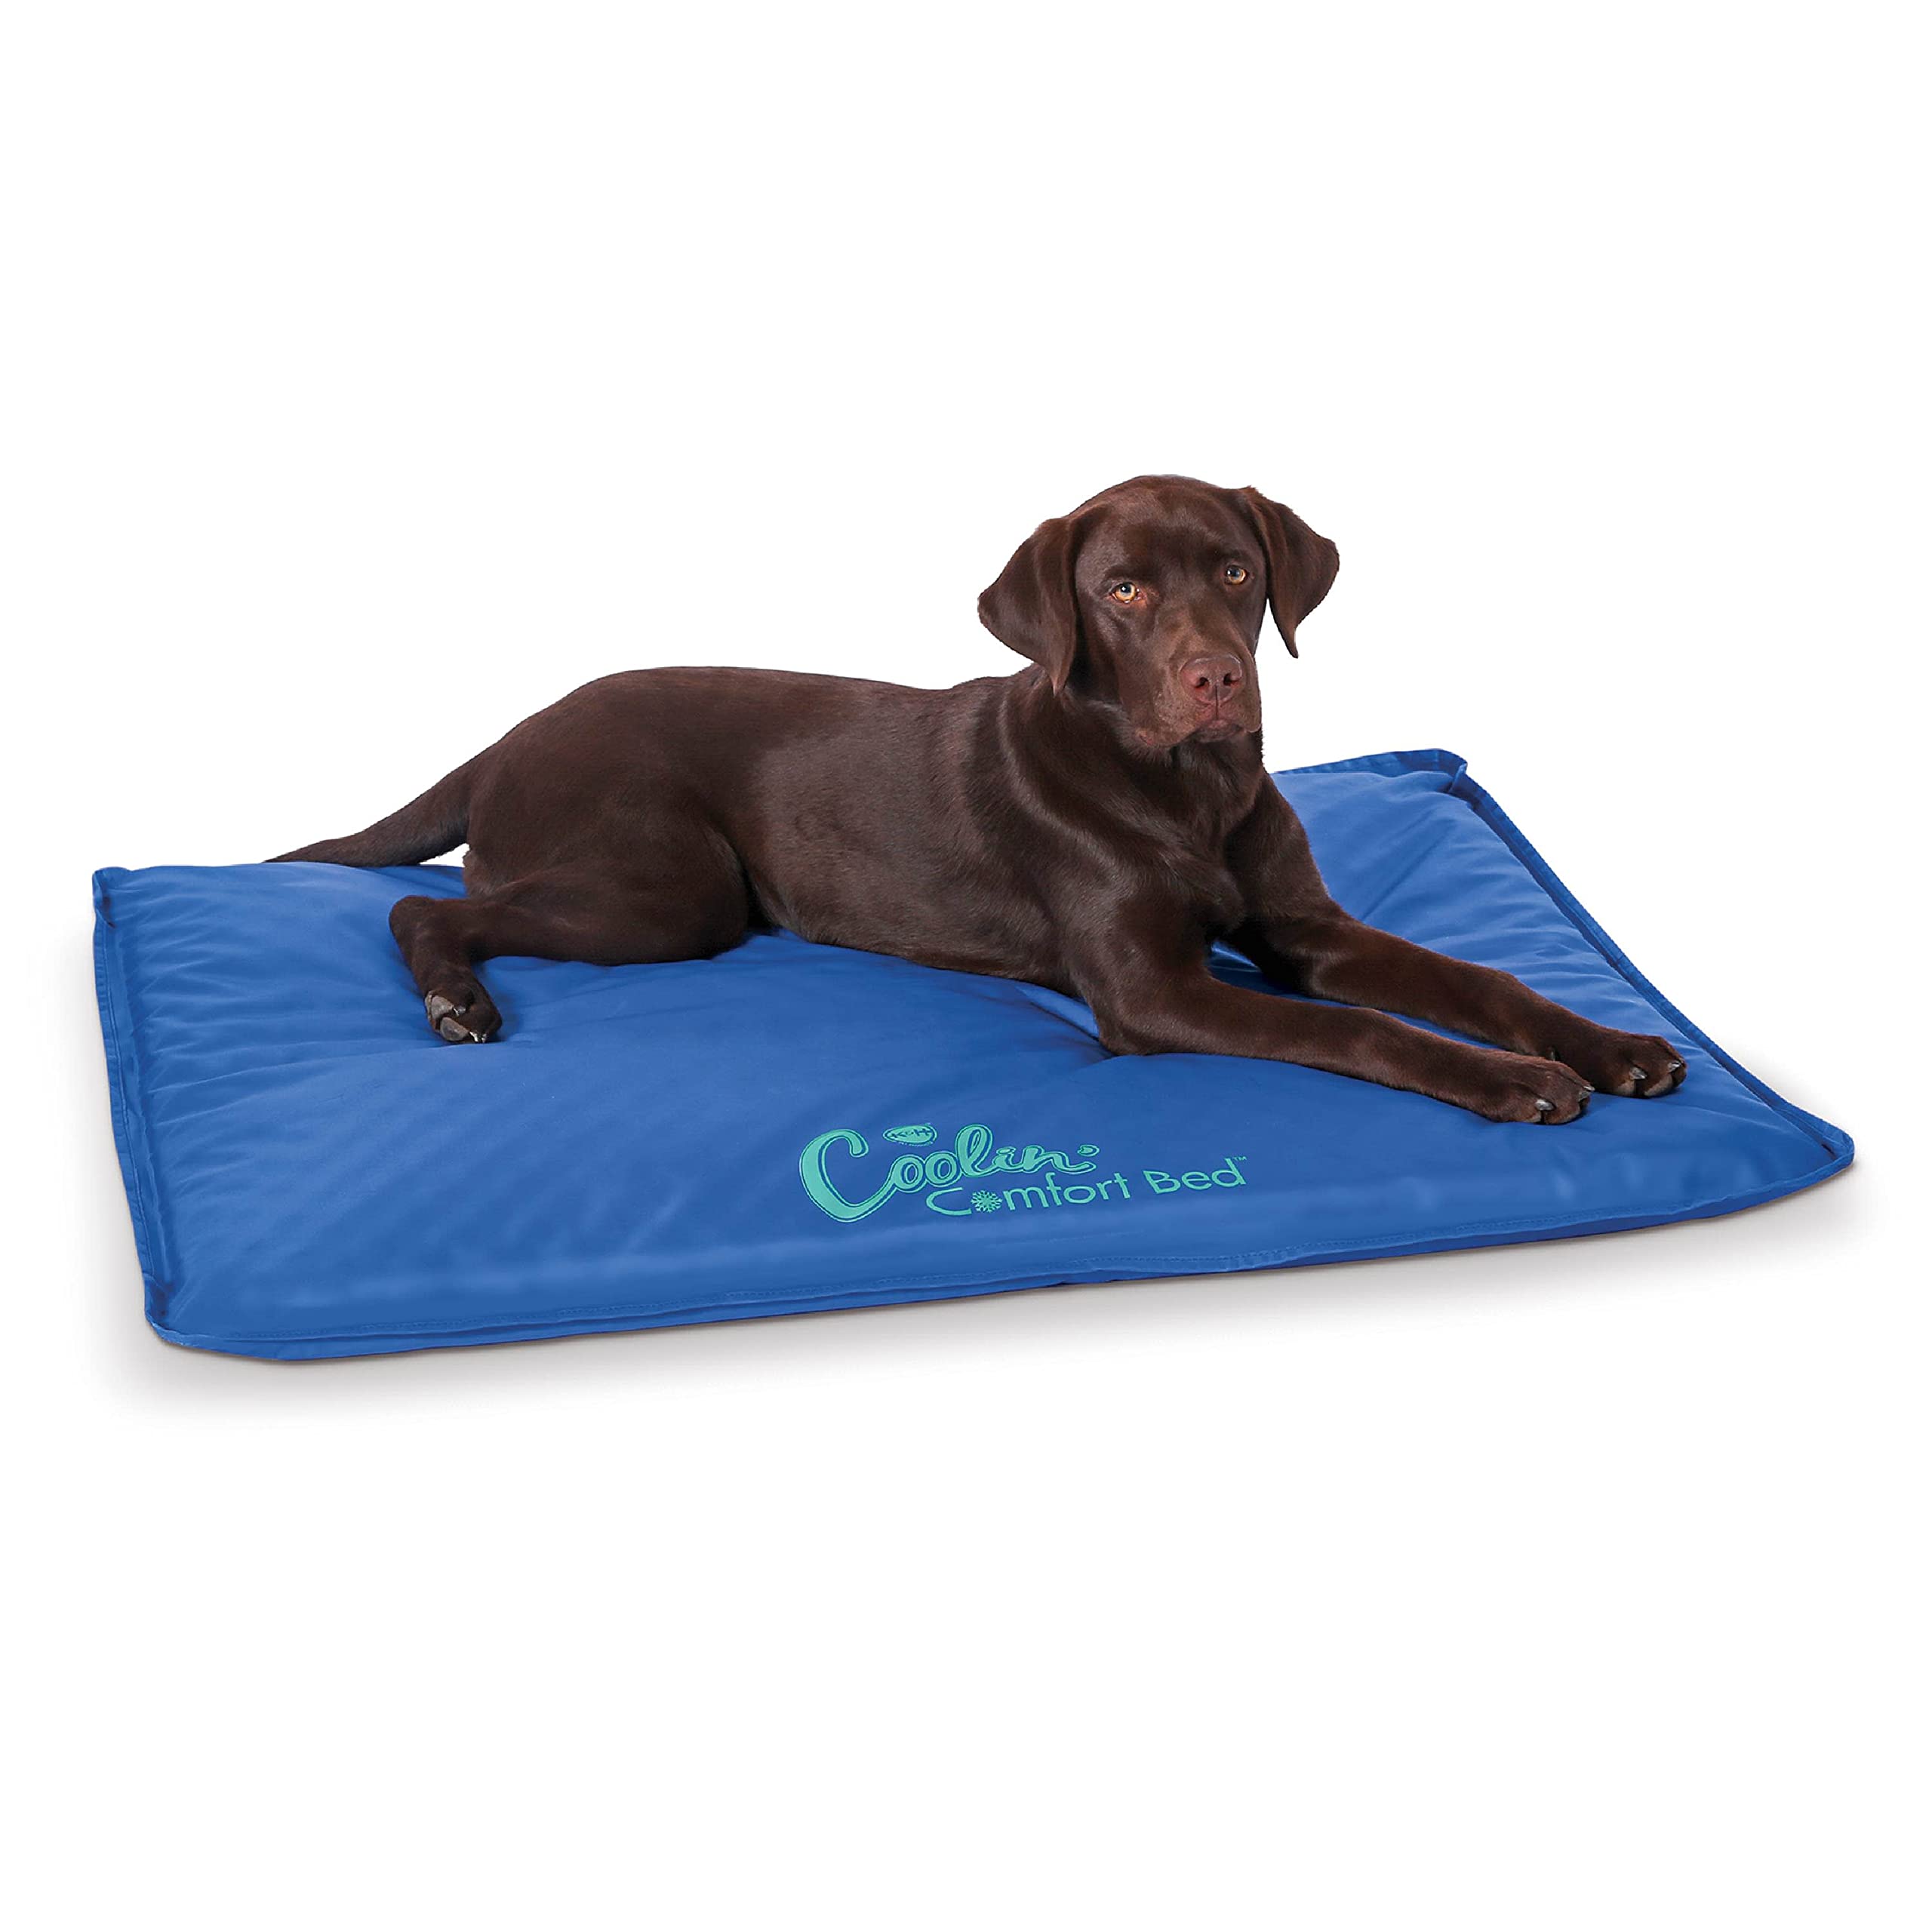 32" x 44" K&H Pet Products Coolin' Comfort Water Cooled Orthopedic Dog Bed (Blue, Large) $53.91 + Free Shipping